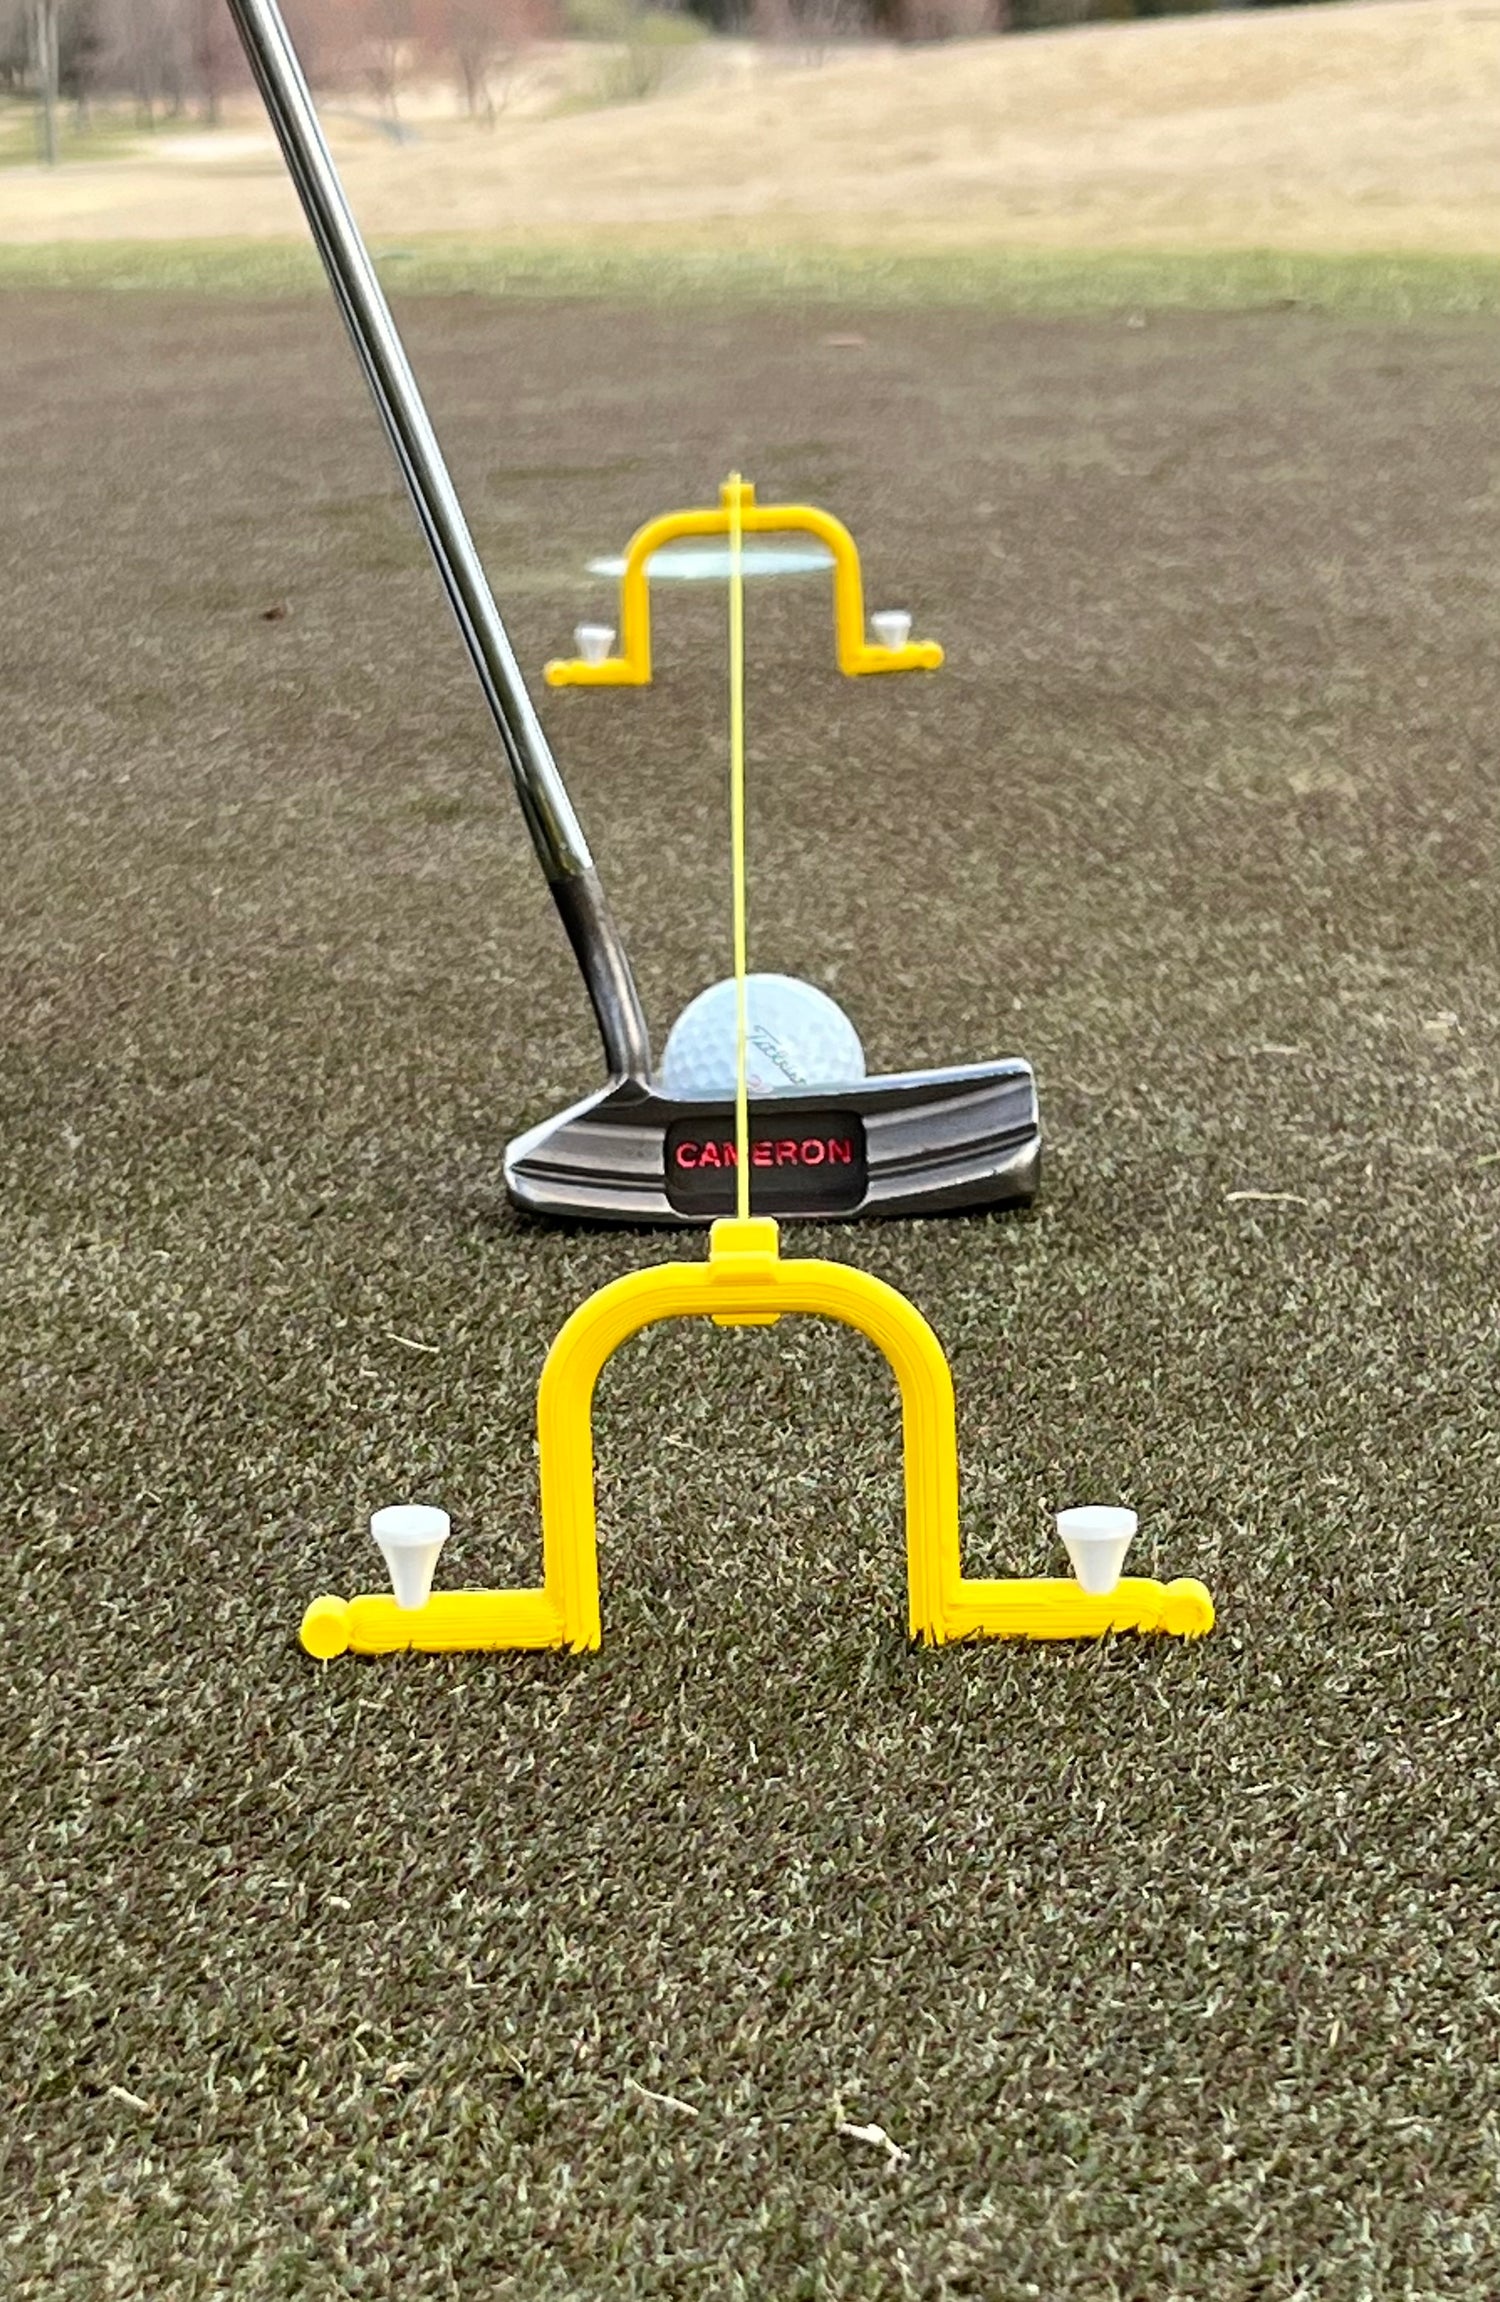 Golf putting gates are a great training aid for all golfersThis putting aid is great for alignment, eyeline,  and stroke. This golf training aid is great for hassle free golf practice. These golf putting gates and putting cord are a great training aid.